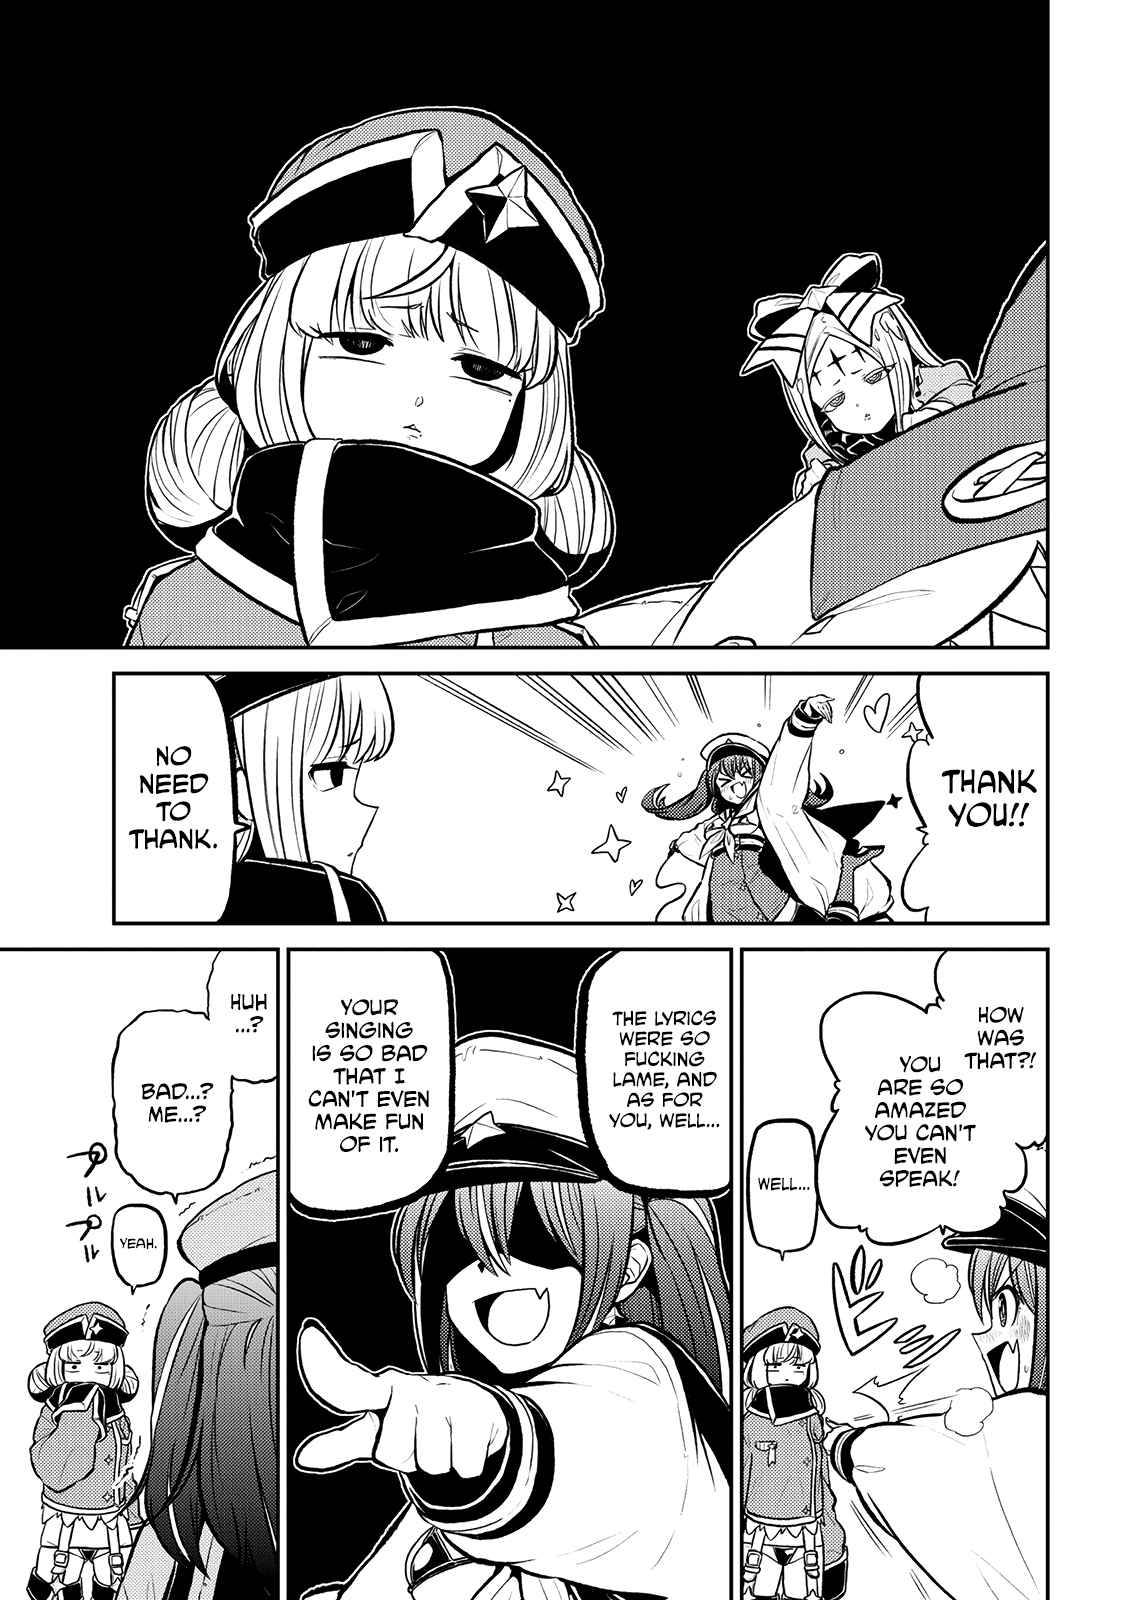 Looking up to Magical Girls Vol. 3 Ch. 13